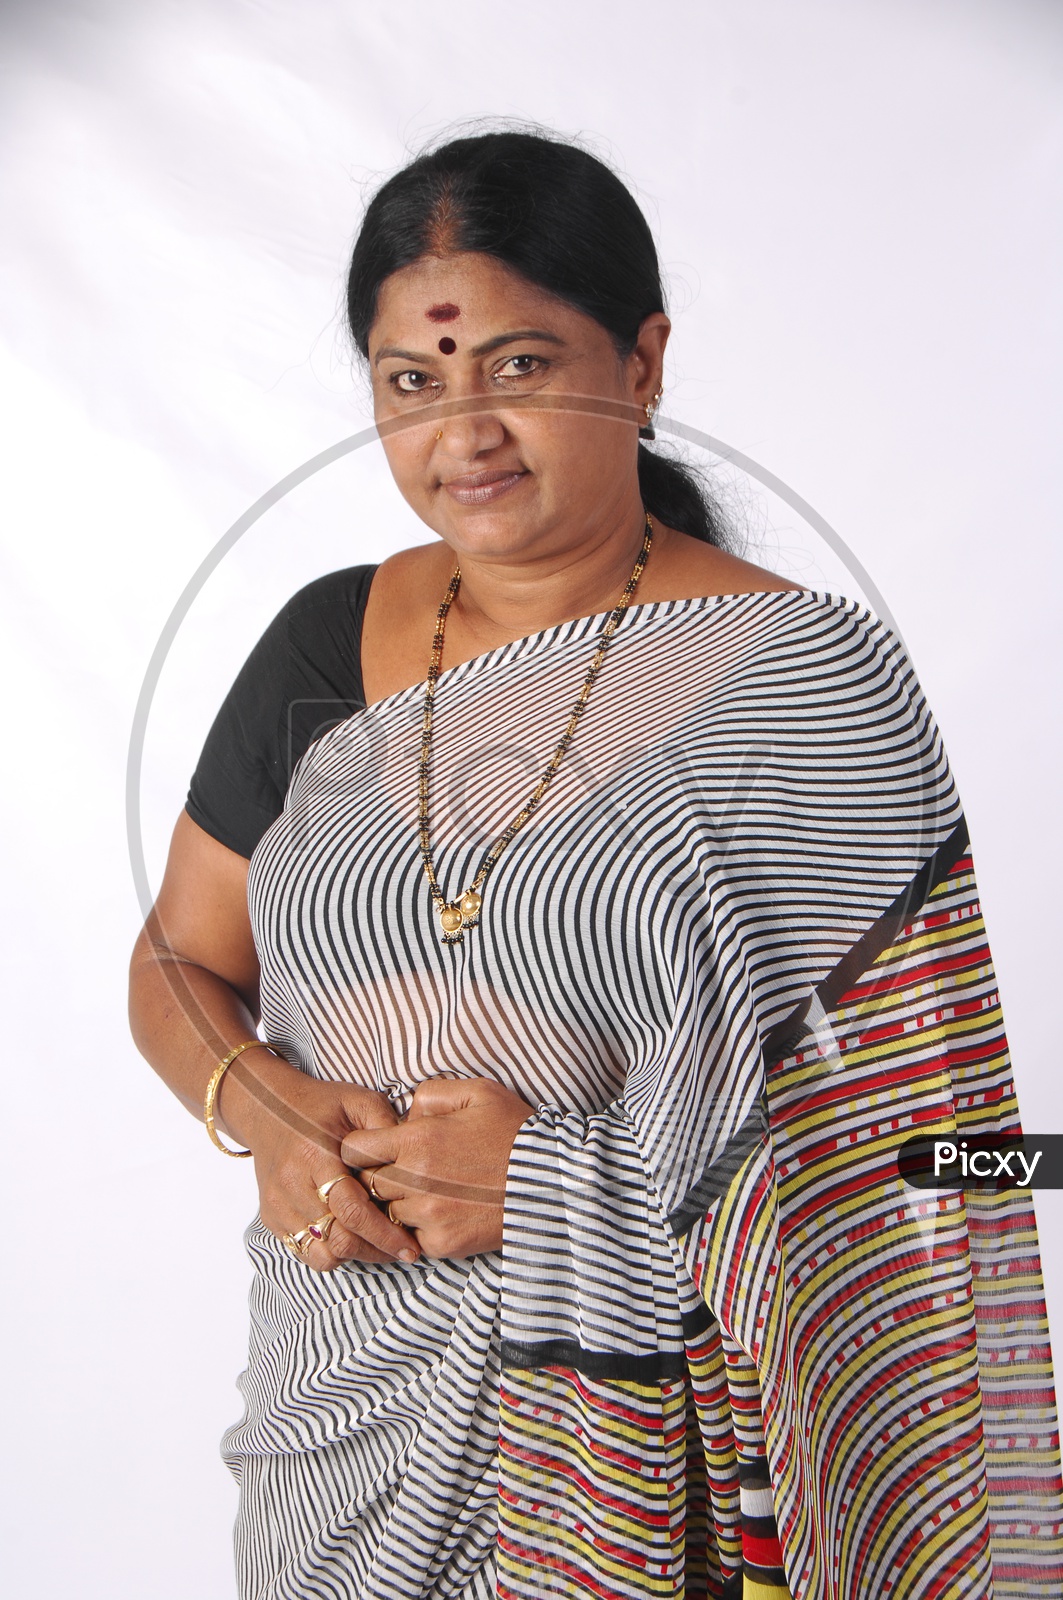 An Indian Woman In Casual Saree or Sari   With A Smile Face on an Isolated White Background